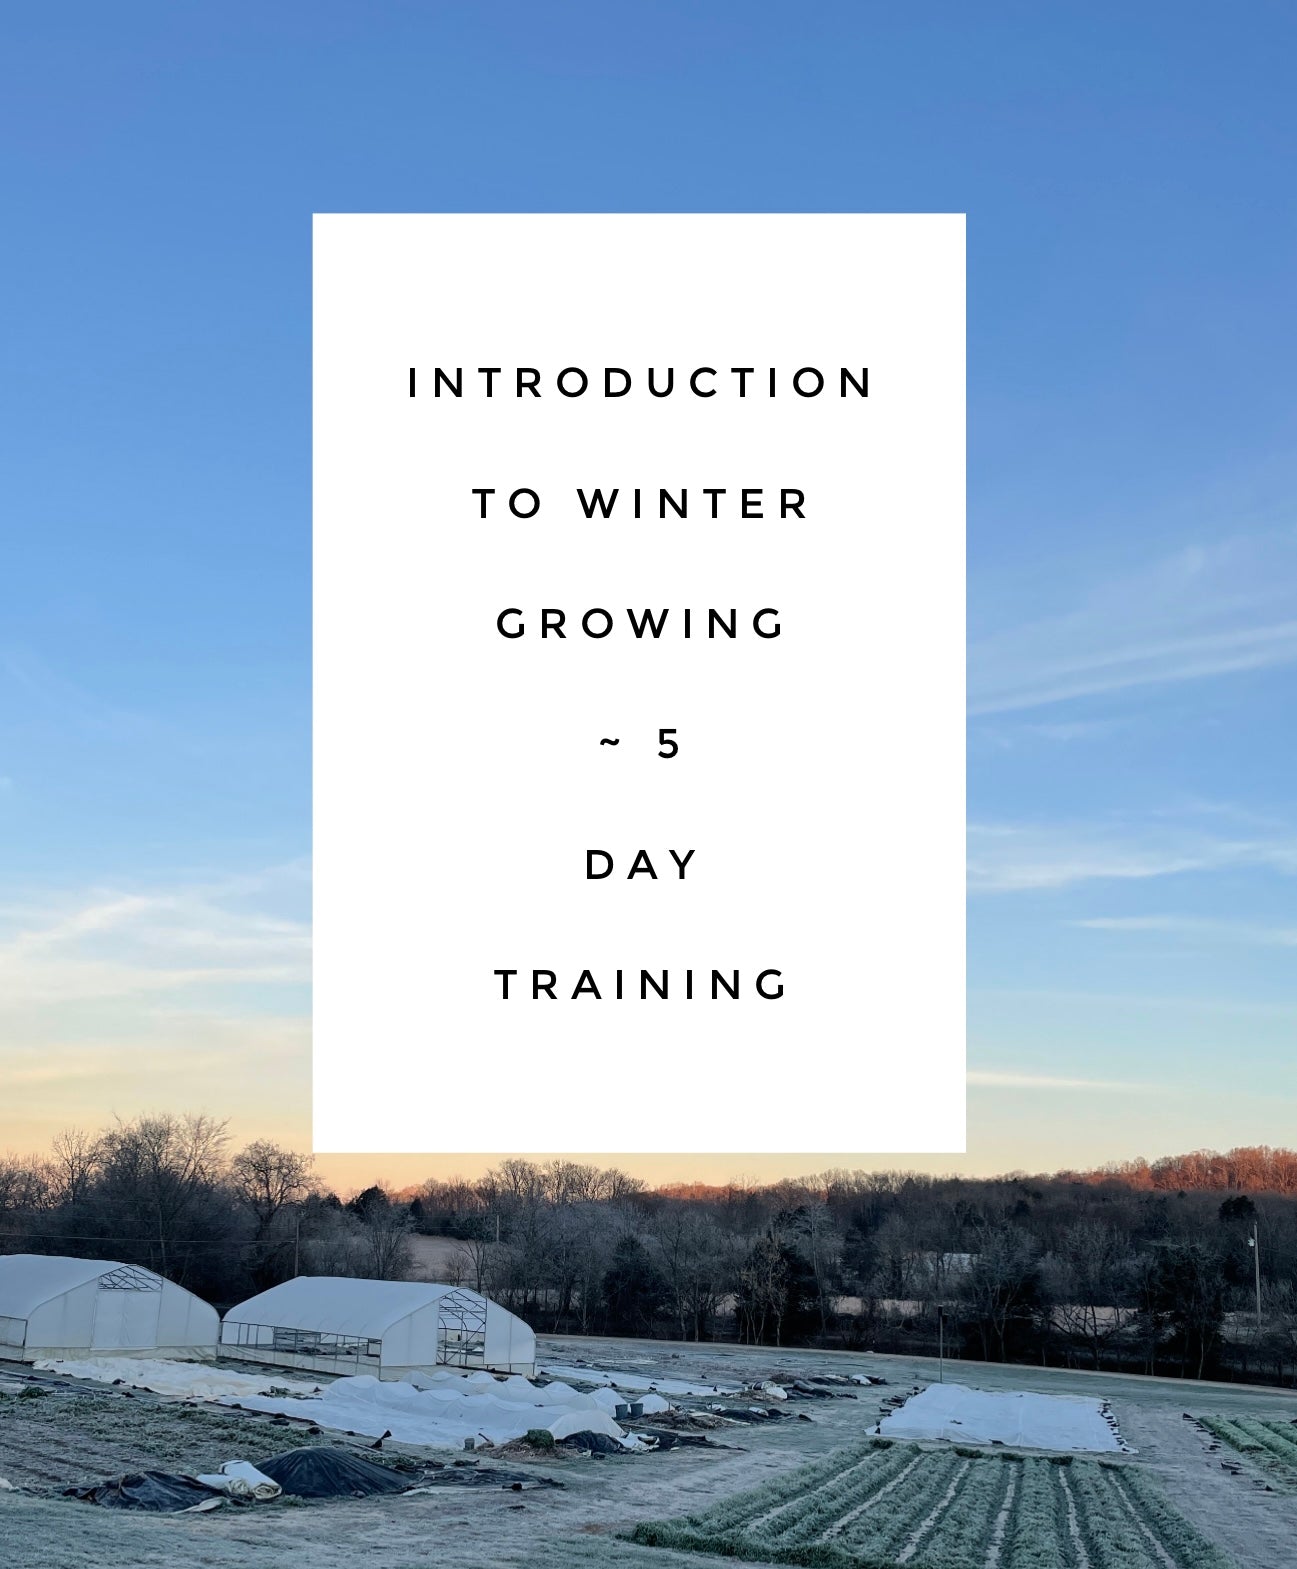 Registration - 5 day Introduction to Winter Growing